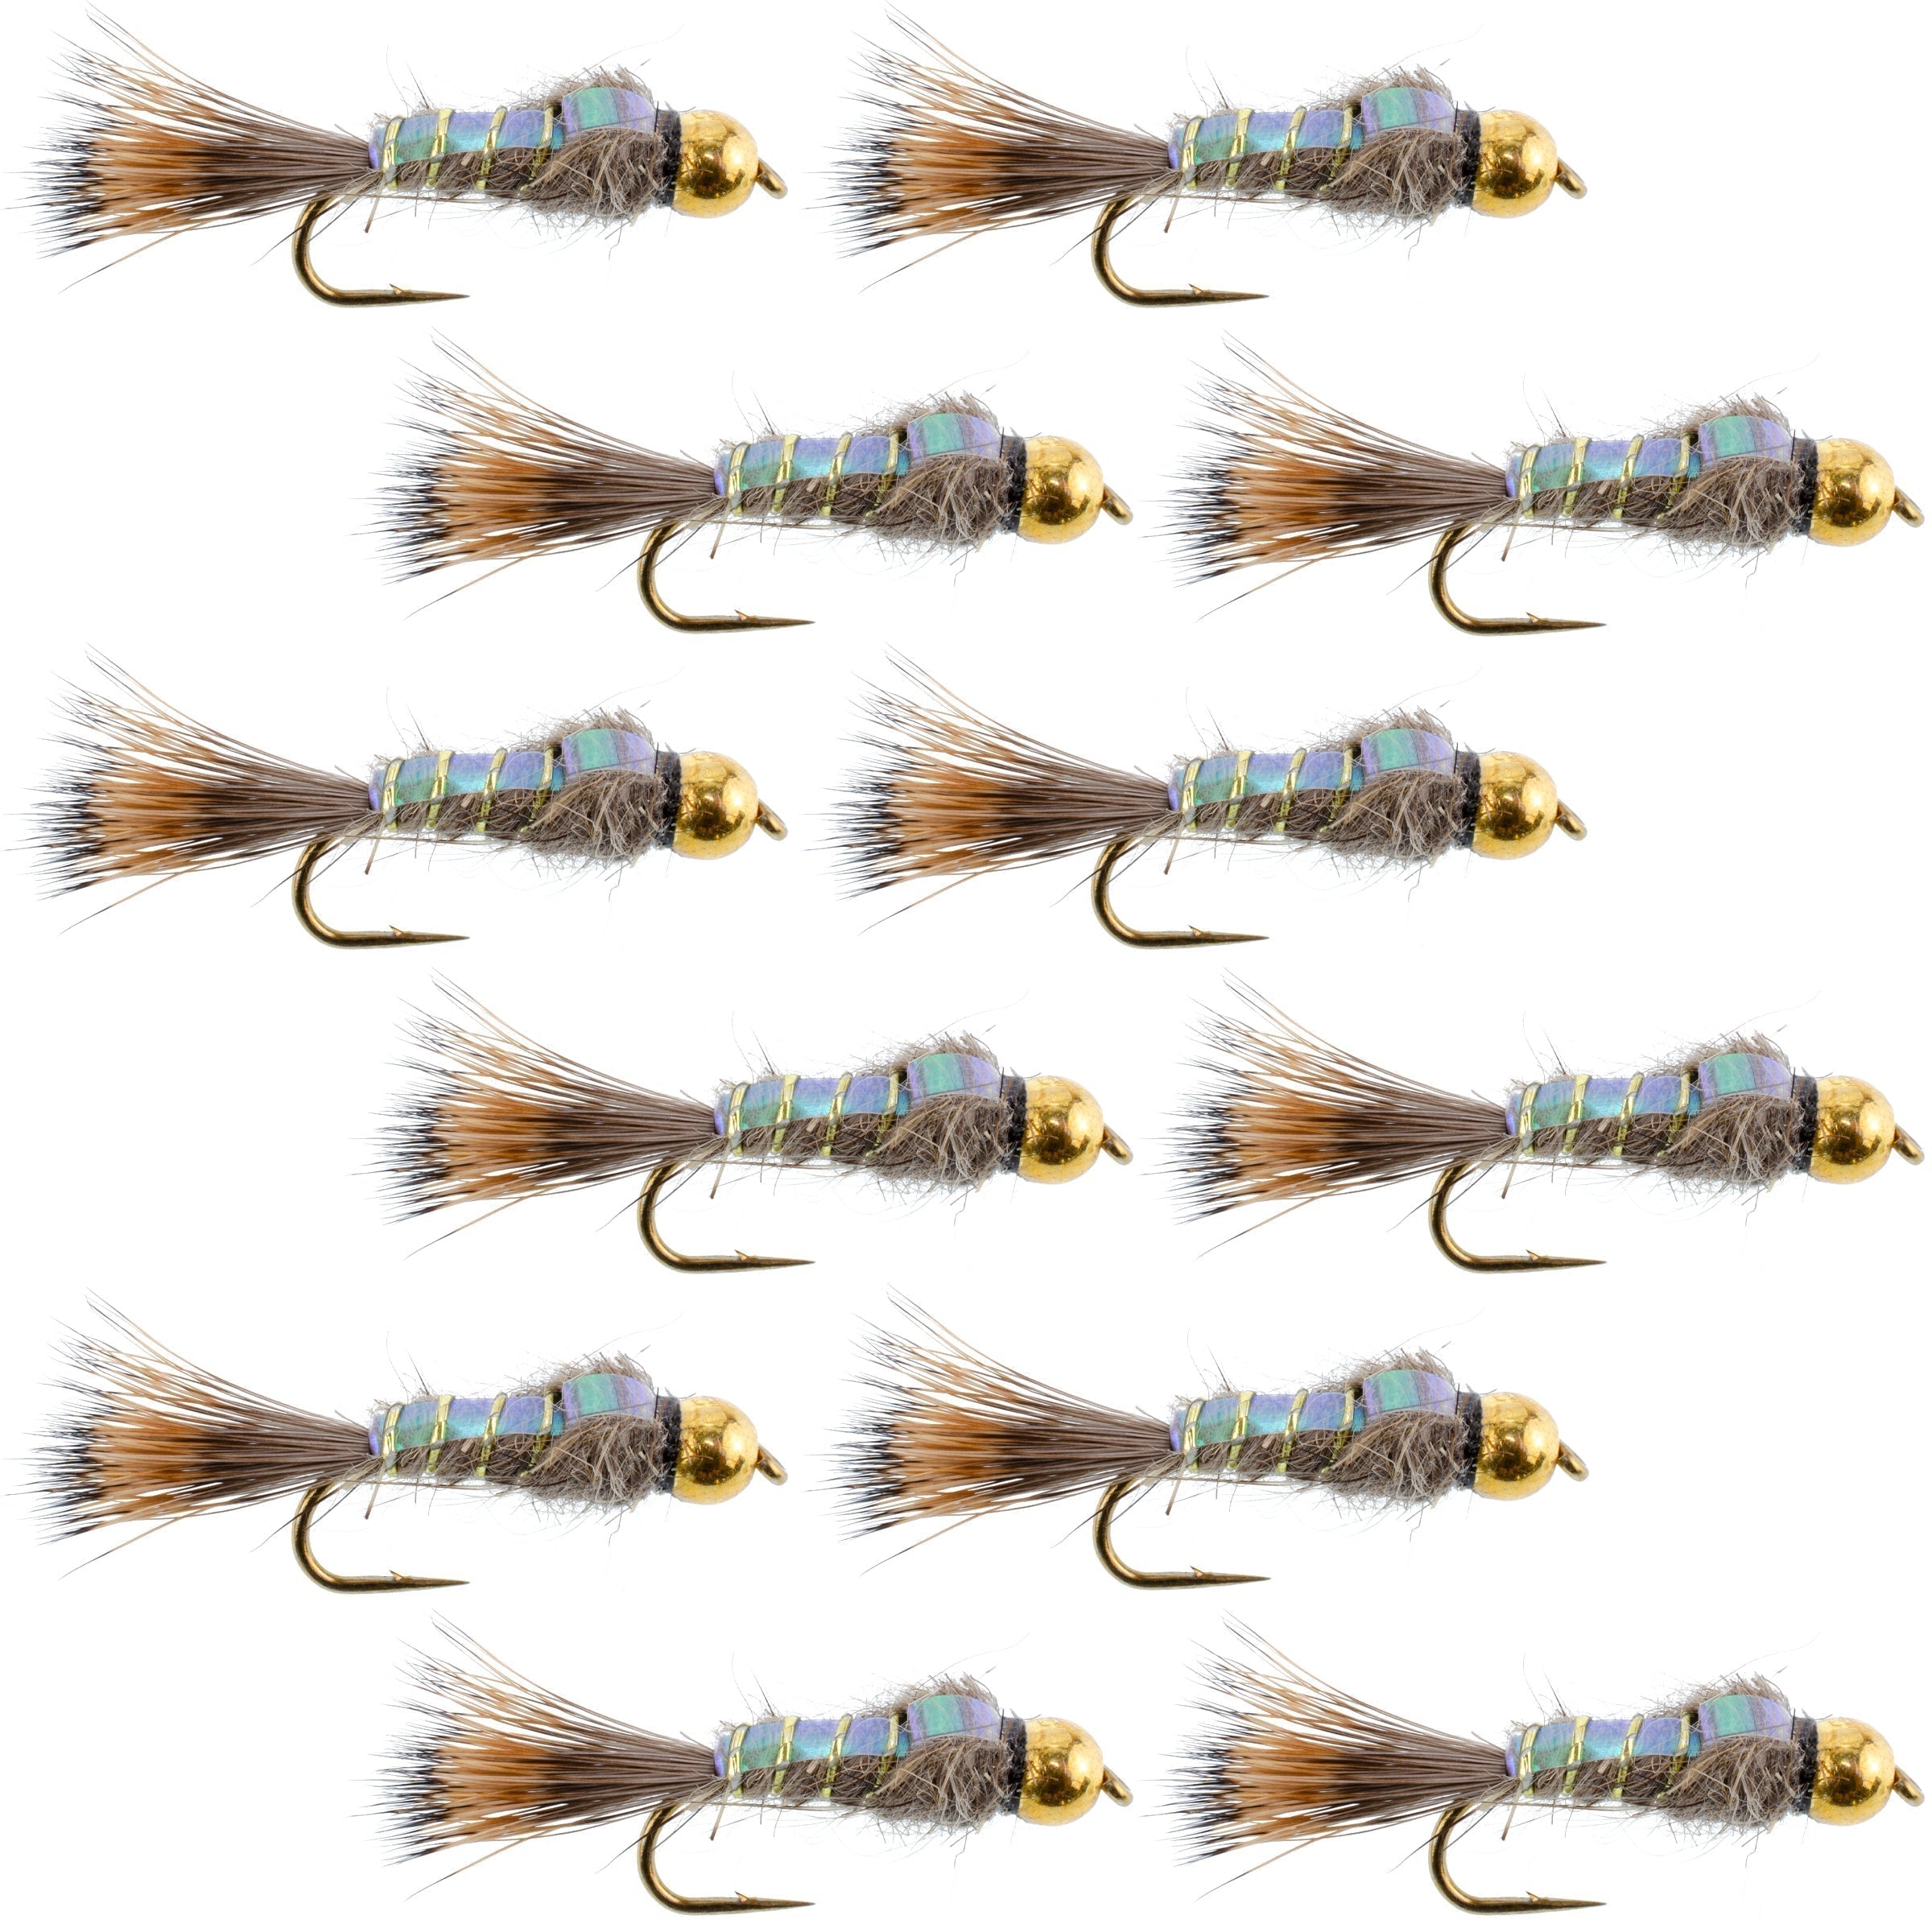 Tungsten Bead Flashback Gold Ribbed Hare's Ear Trout Fly 1 Dozen Nymph Wet Flies Size 16